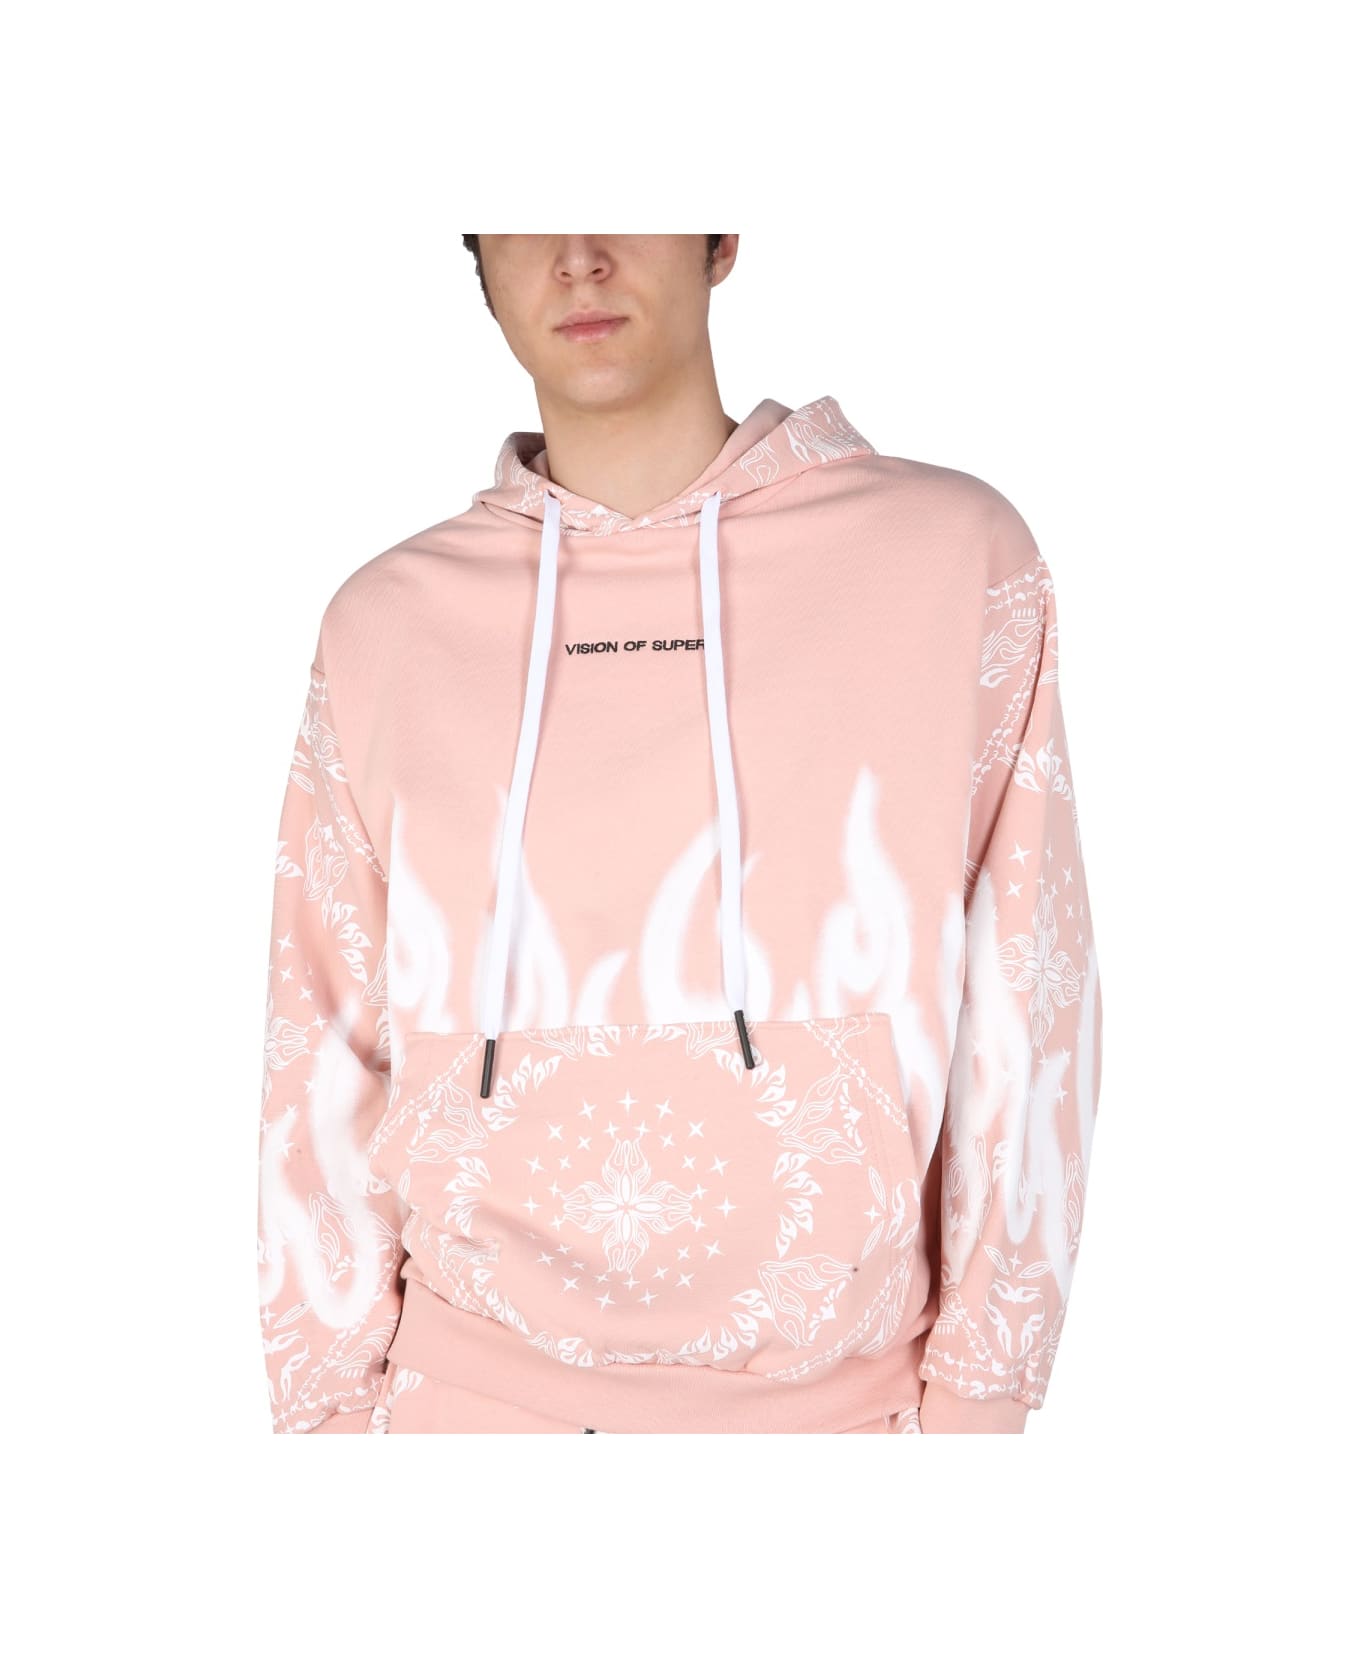 Vision of Super Sweatshirt With Paisley Pattern - PINK